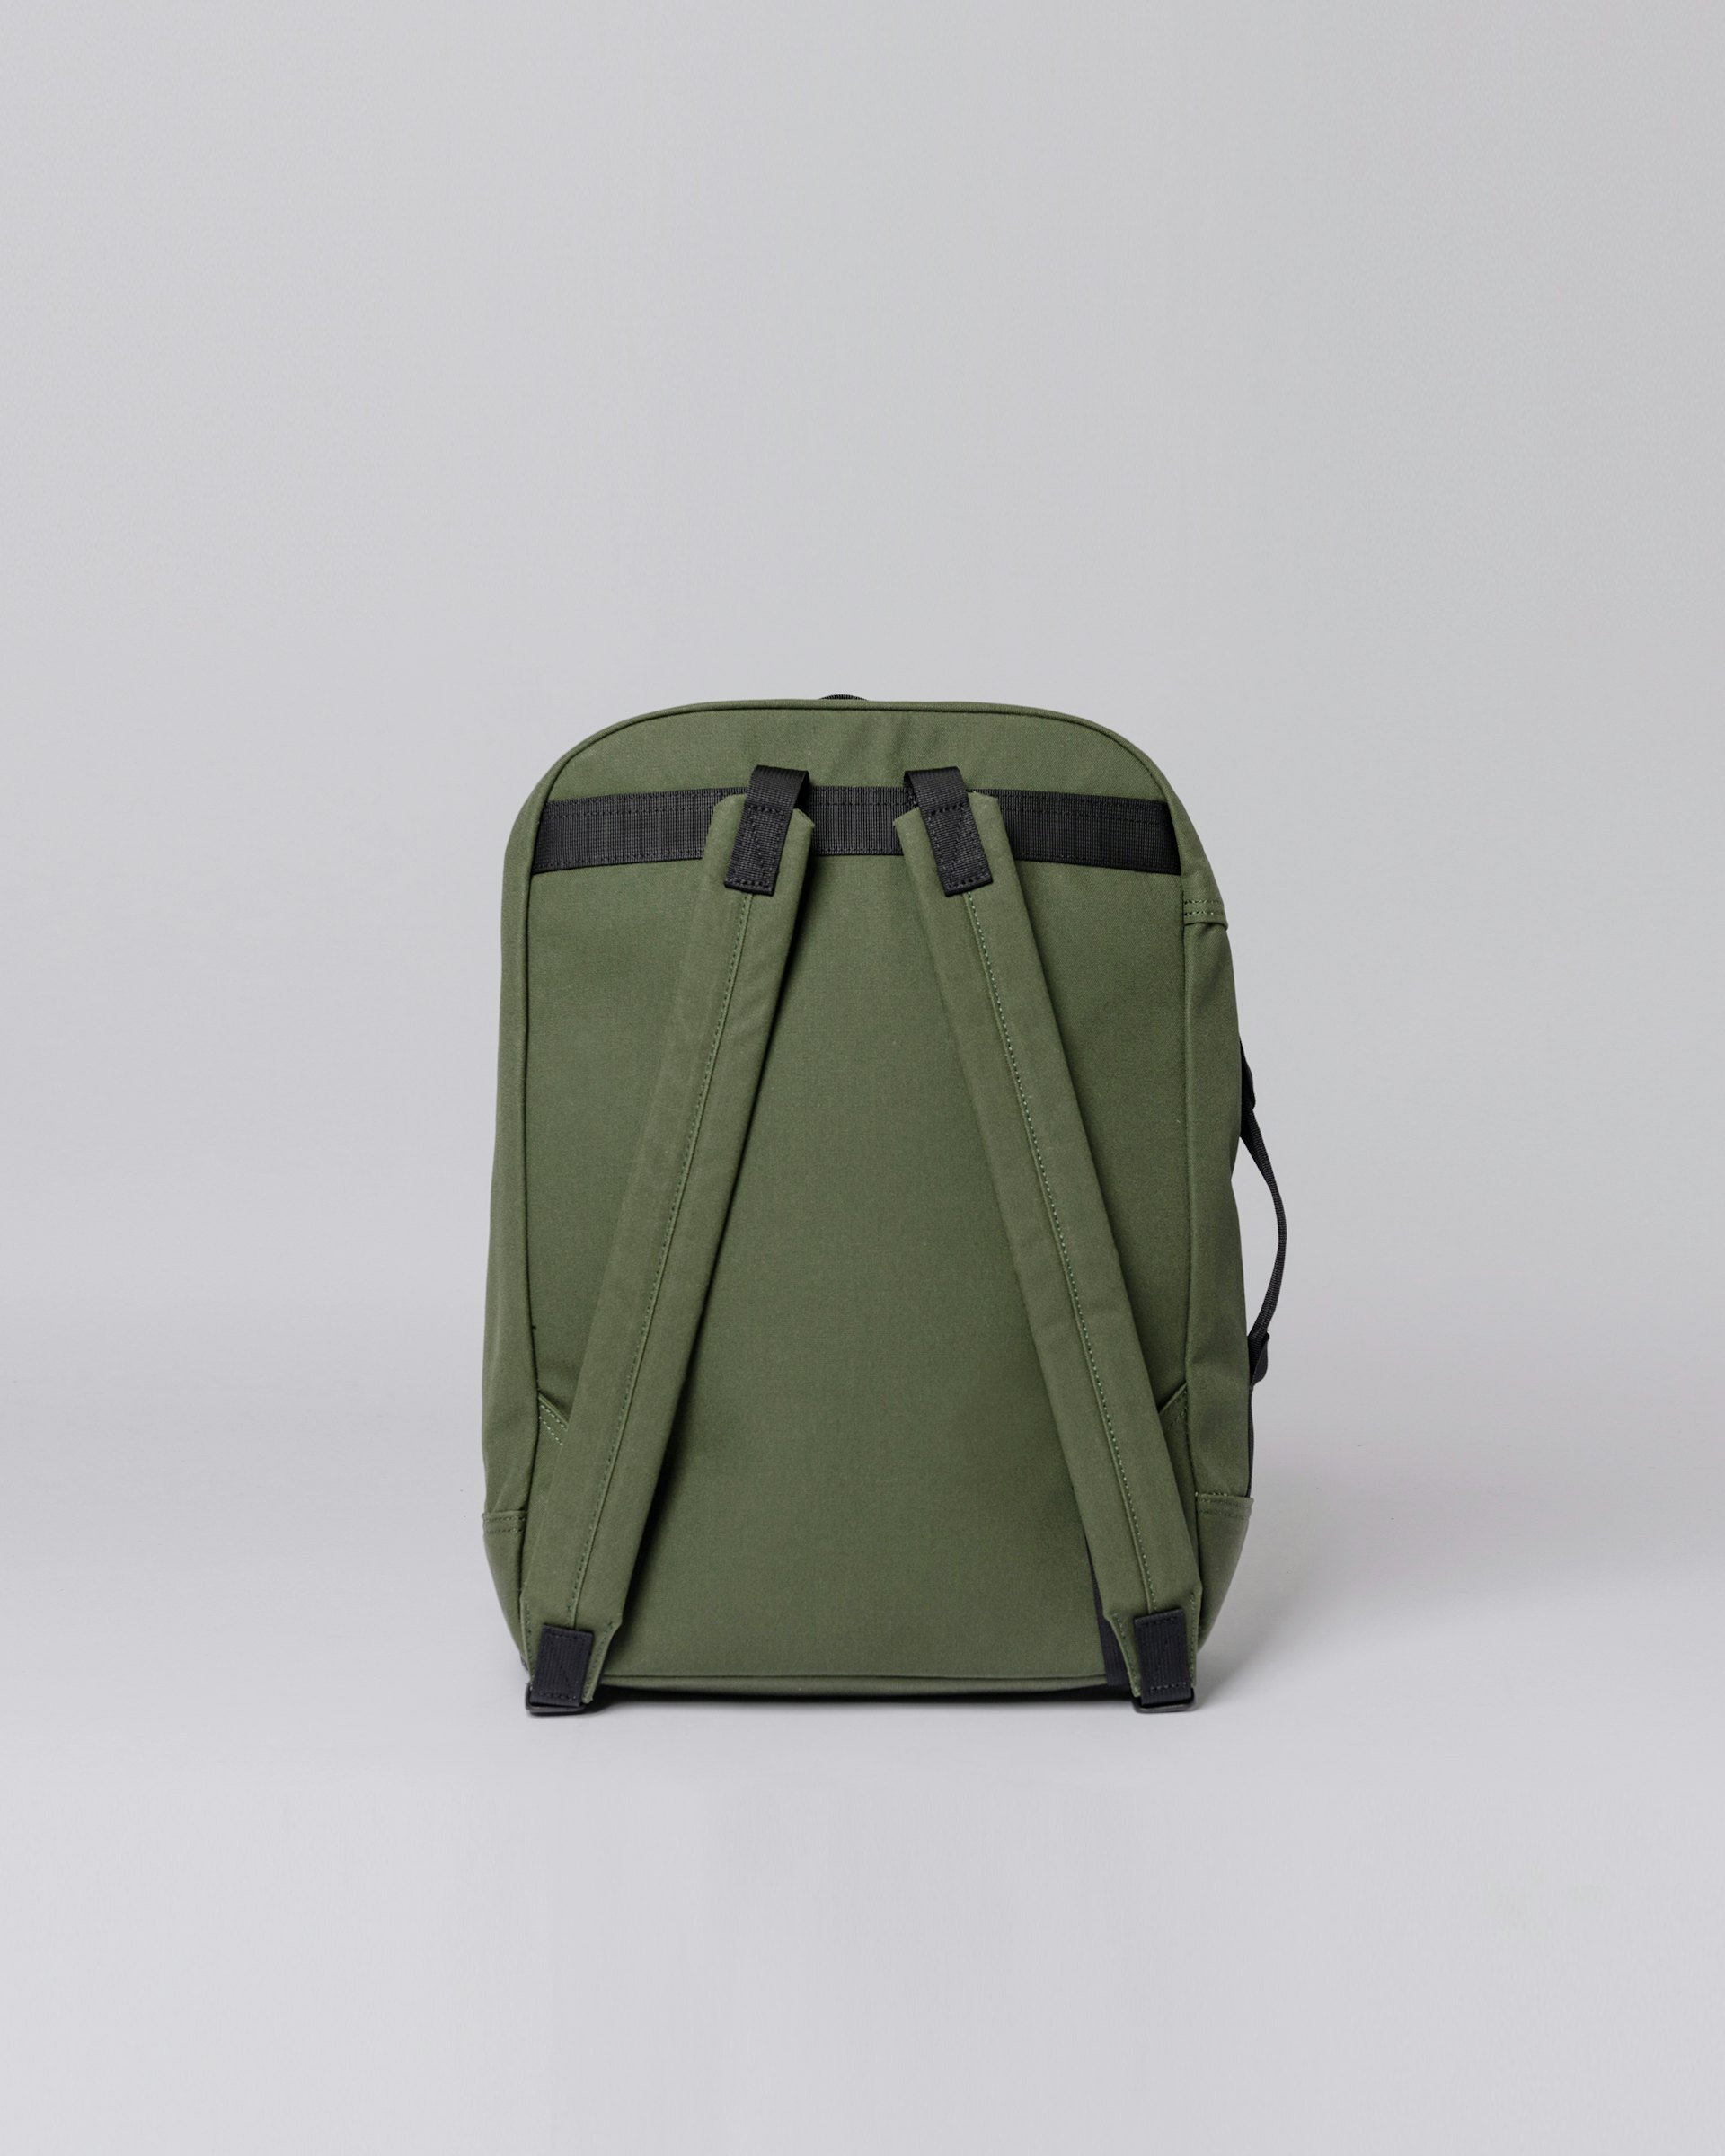 August belongs to the category Backpacks and is in color dawn green (3 of 5)